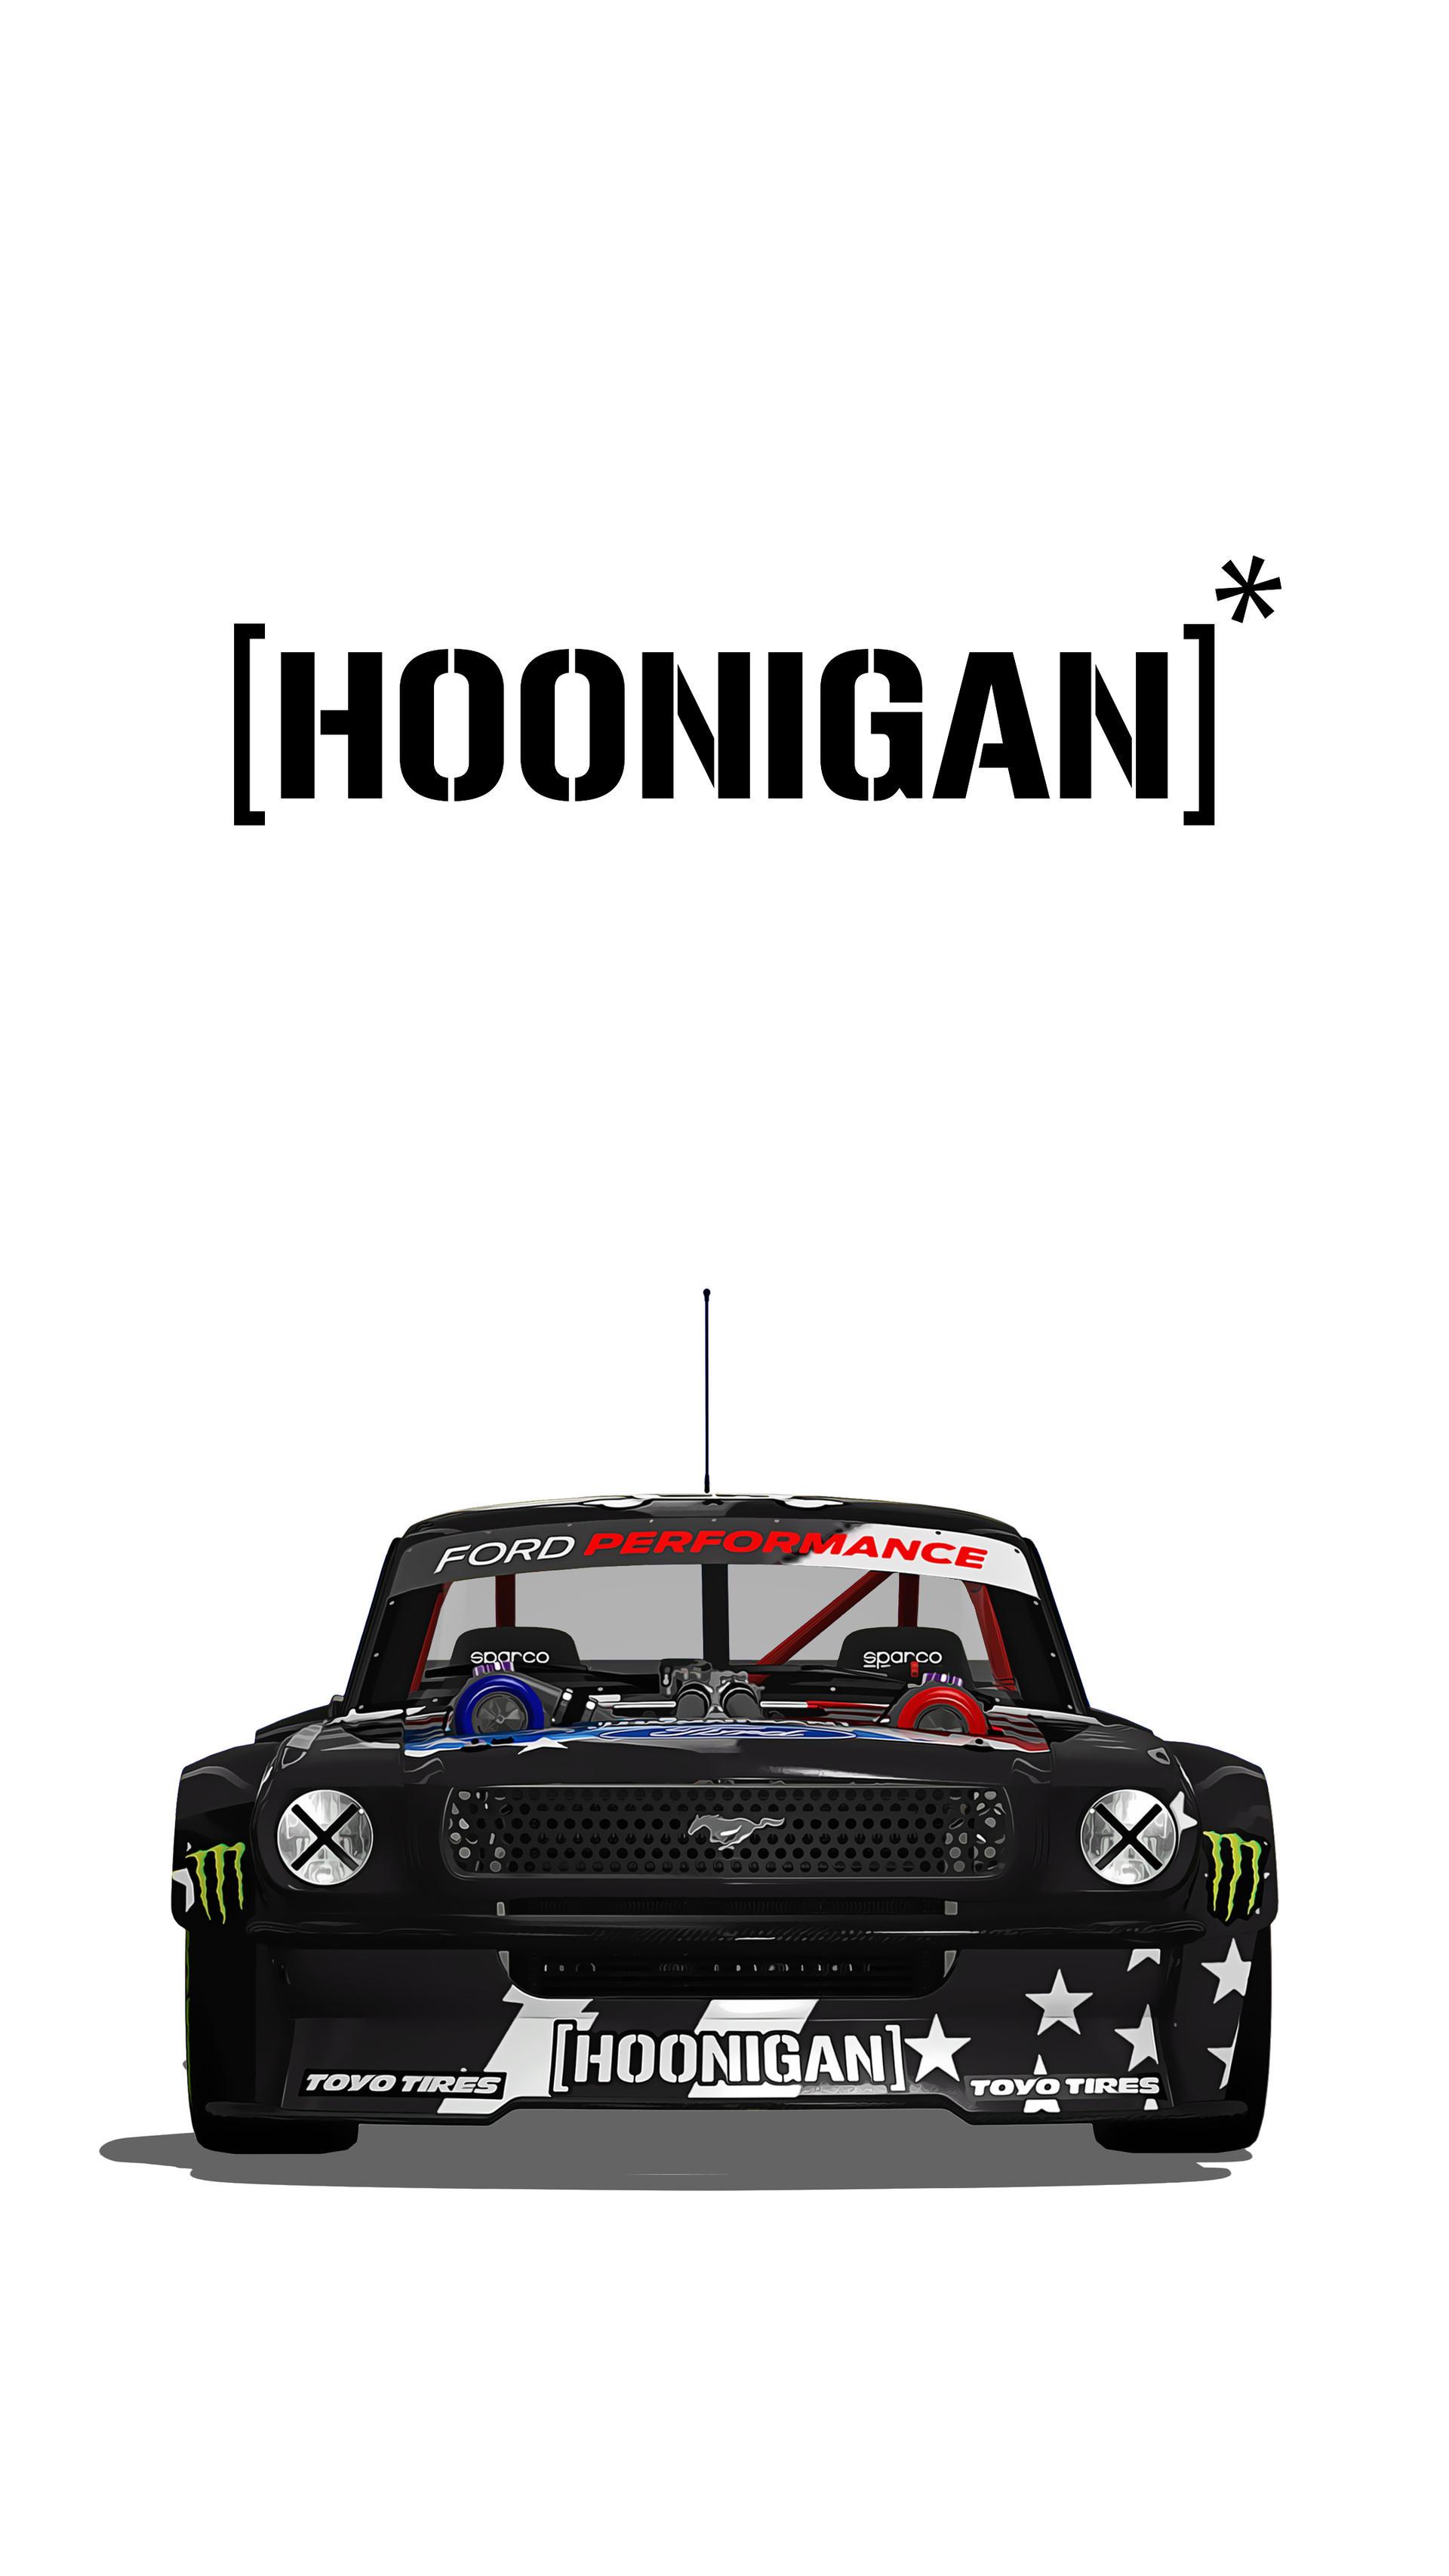 Hoonigan Mustang Mobile Wallpaper W Title By Need4swede On